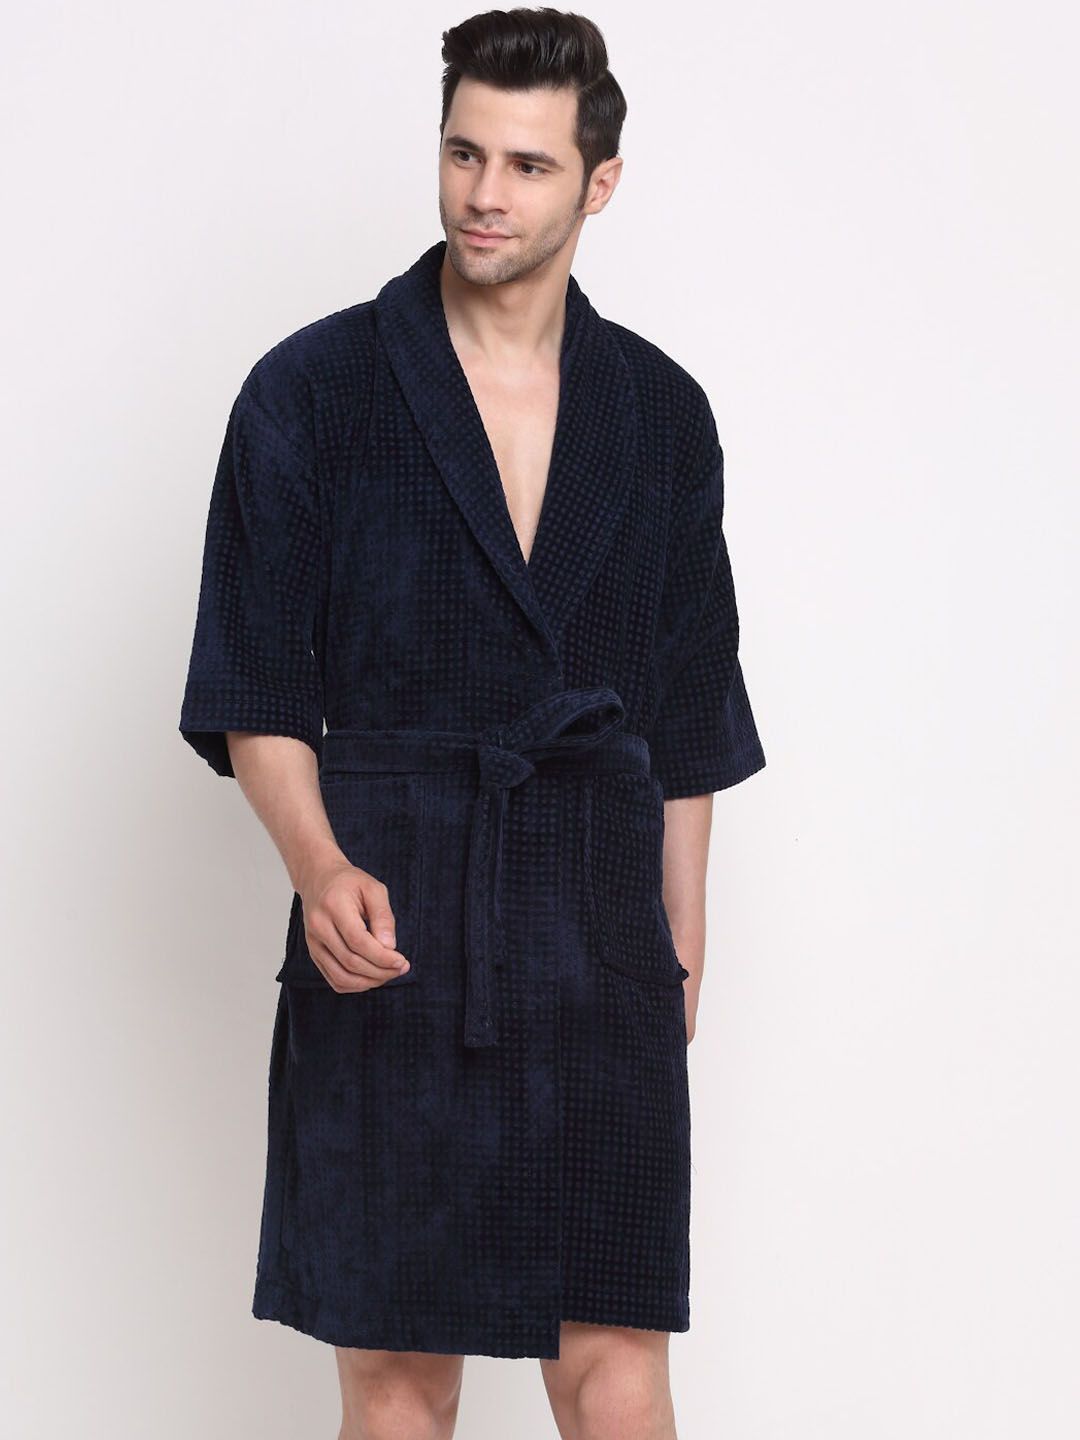 Trident Blue Solid Bath Robe With Belt Price in India